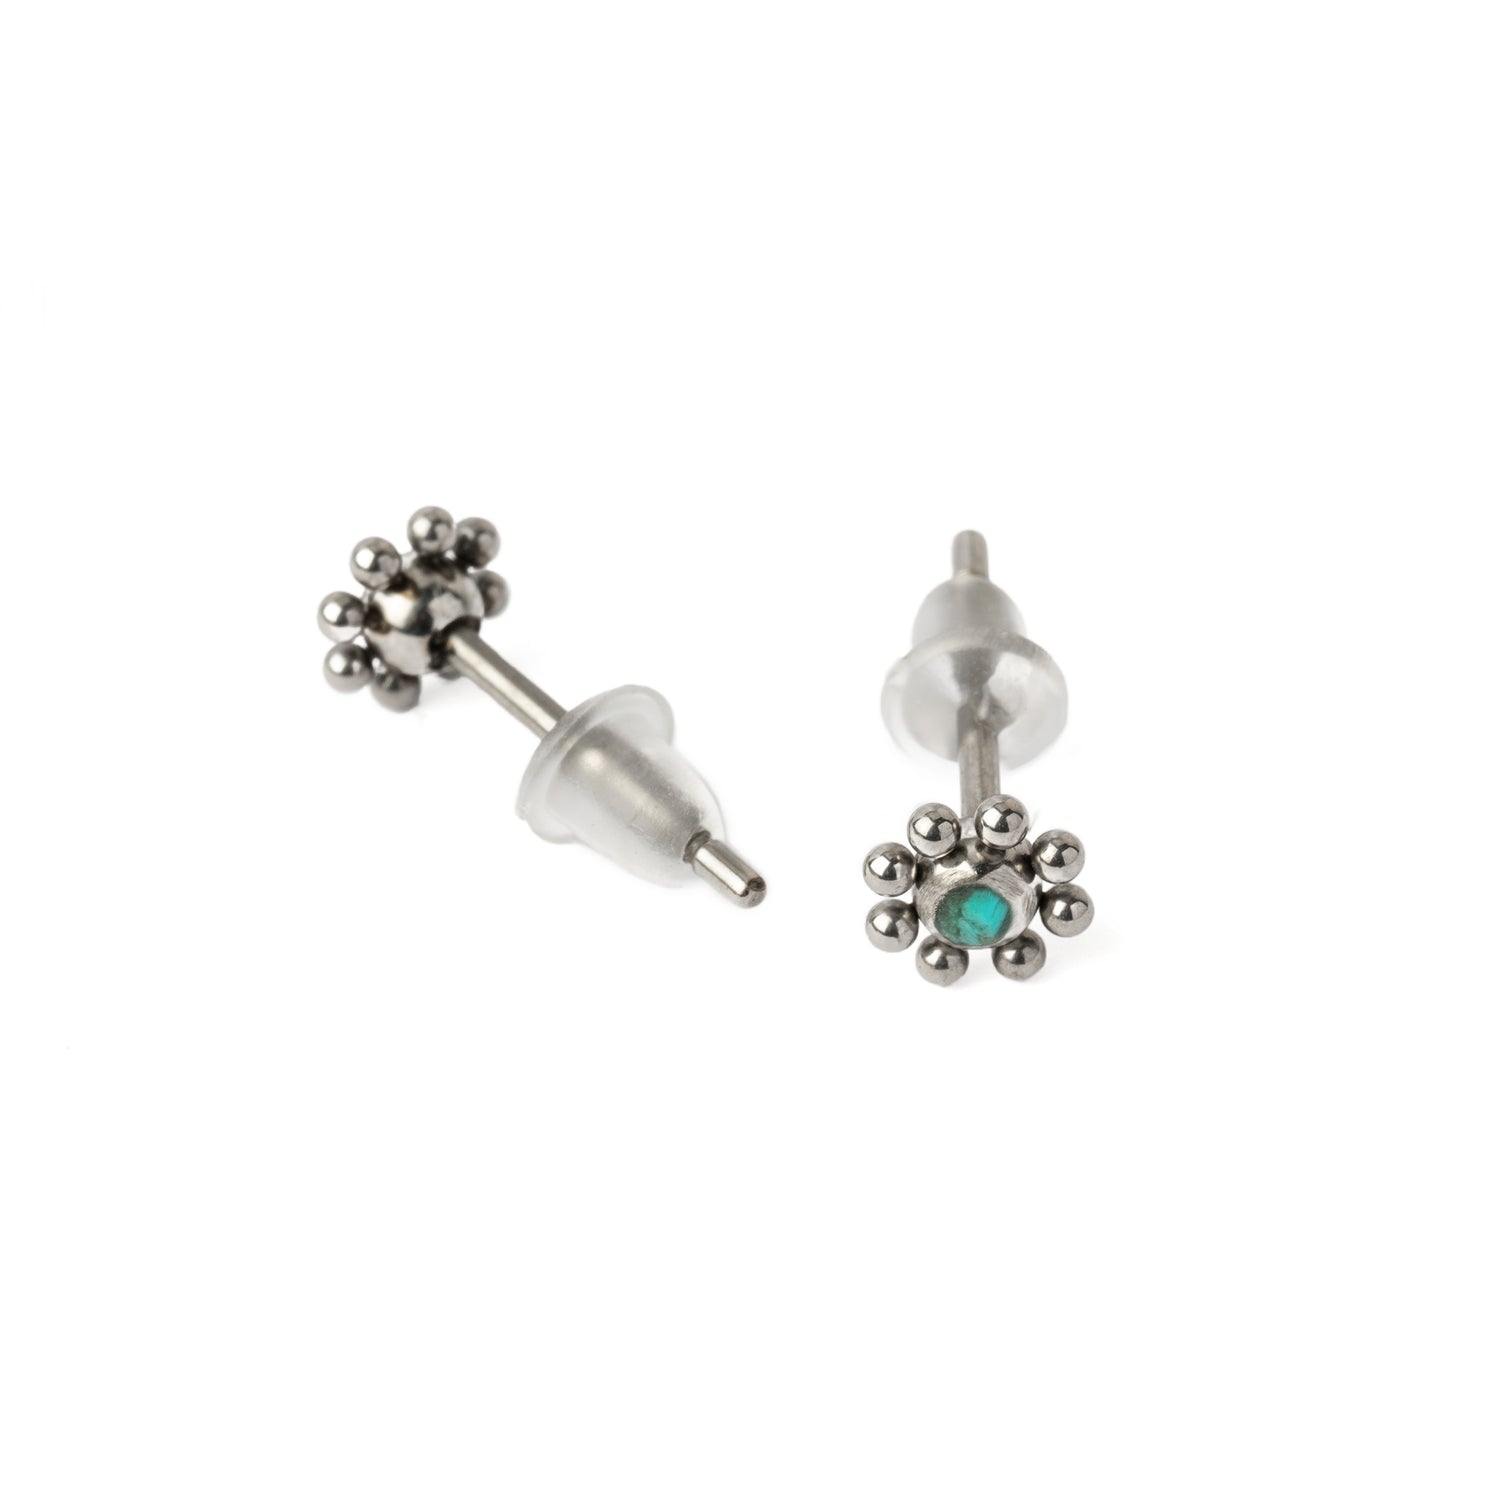 Daisy Turquoise Ear Studs front and back view